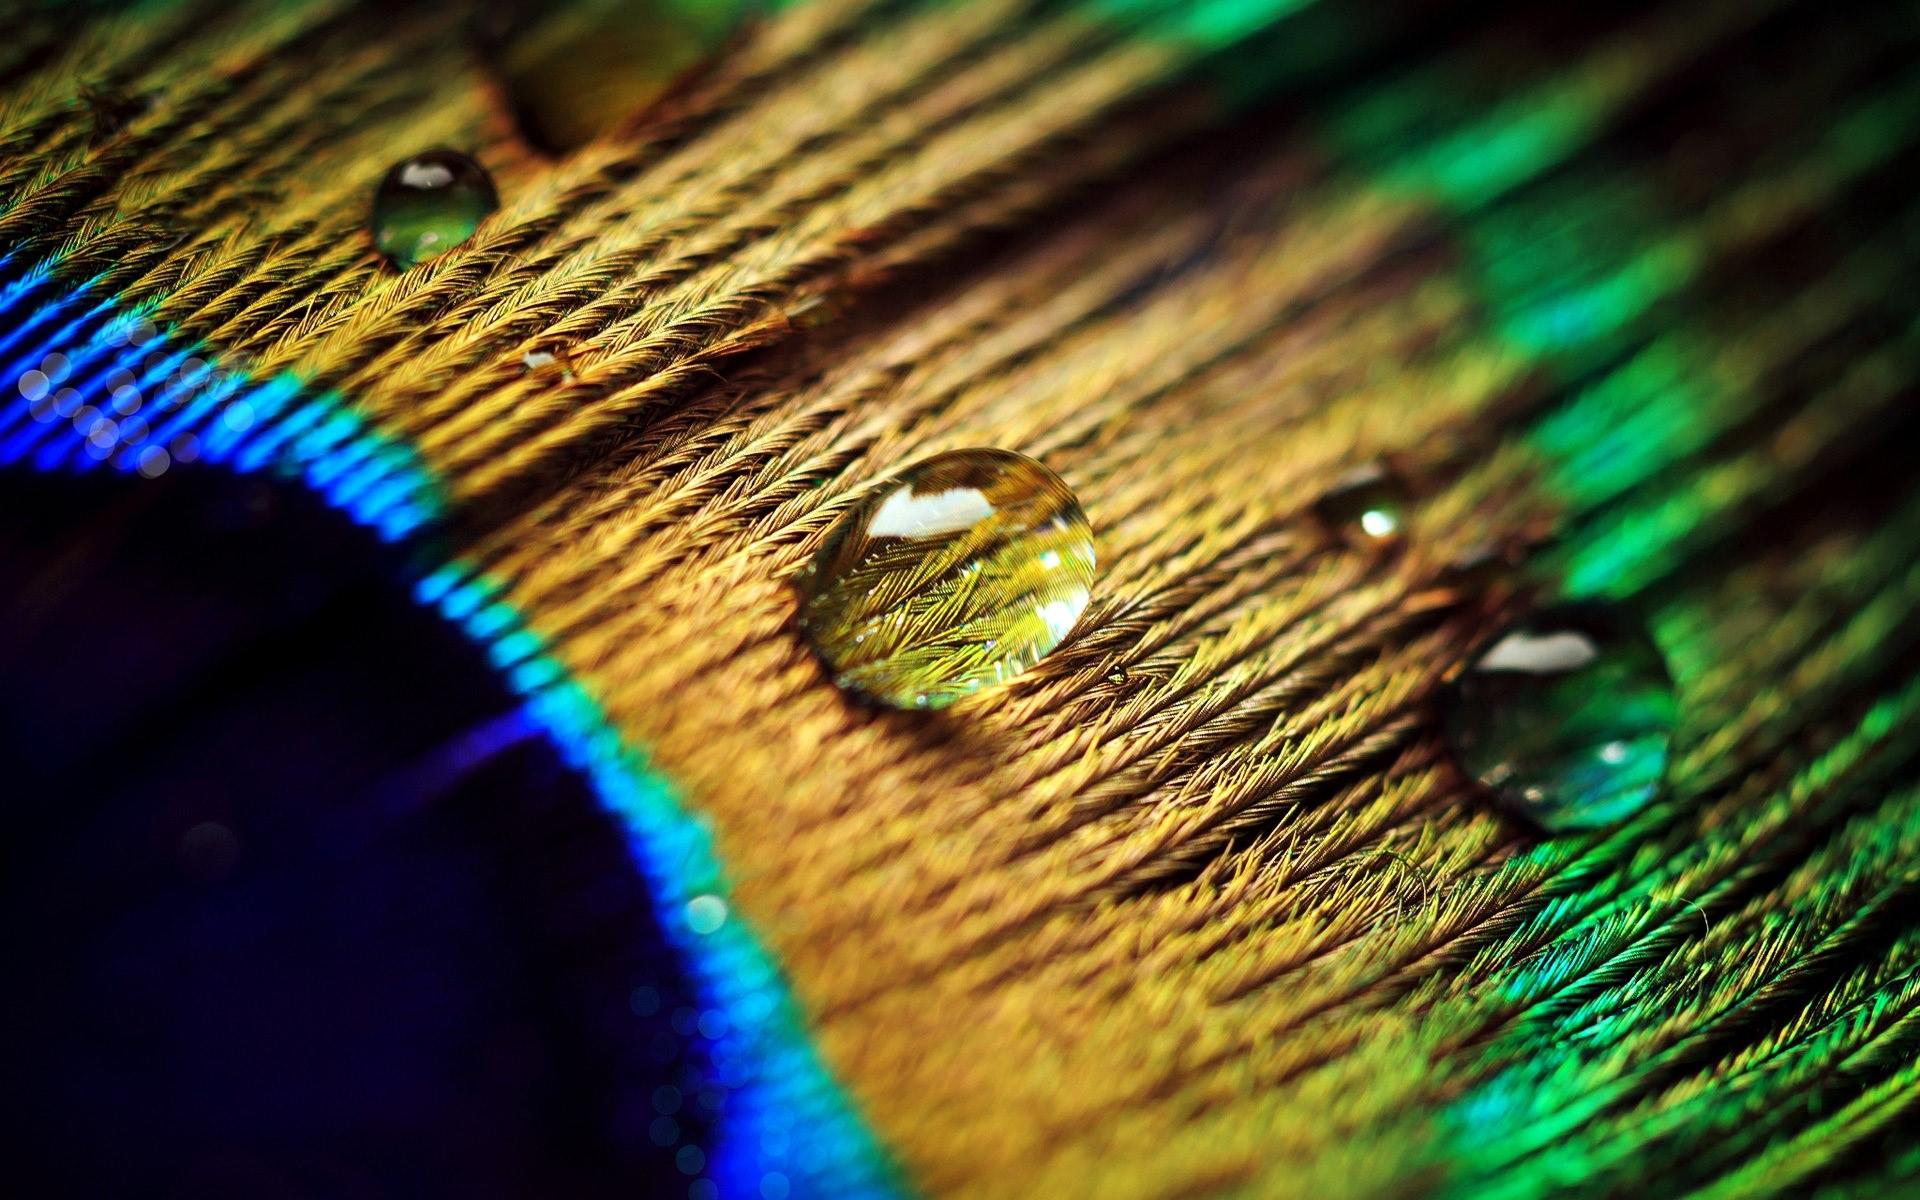 Peacock Feather Macro 1920×1200 Definition Wallpaper. Daily